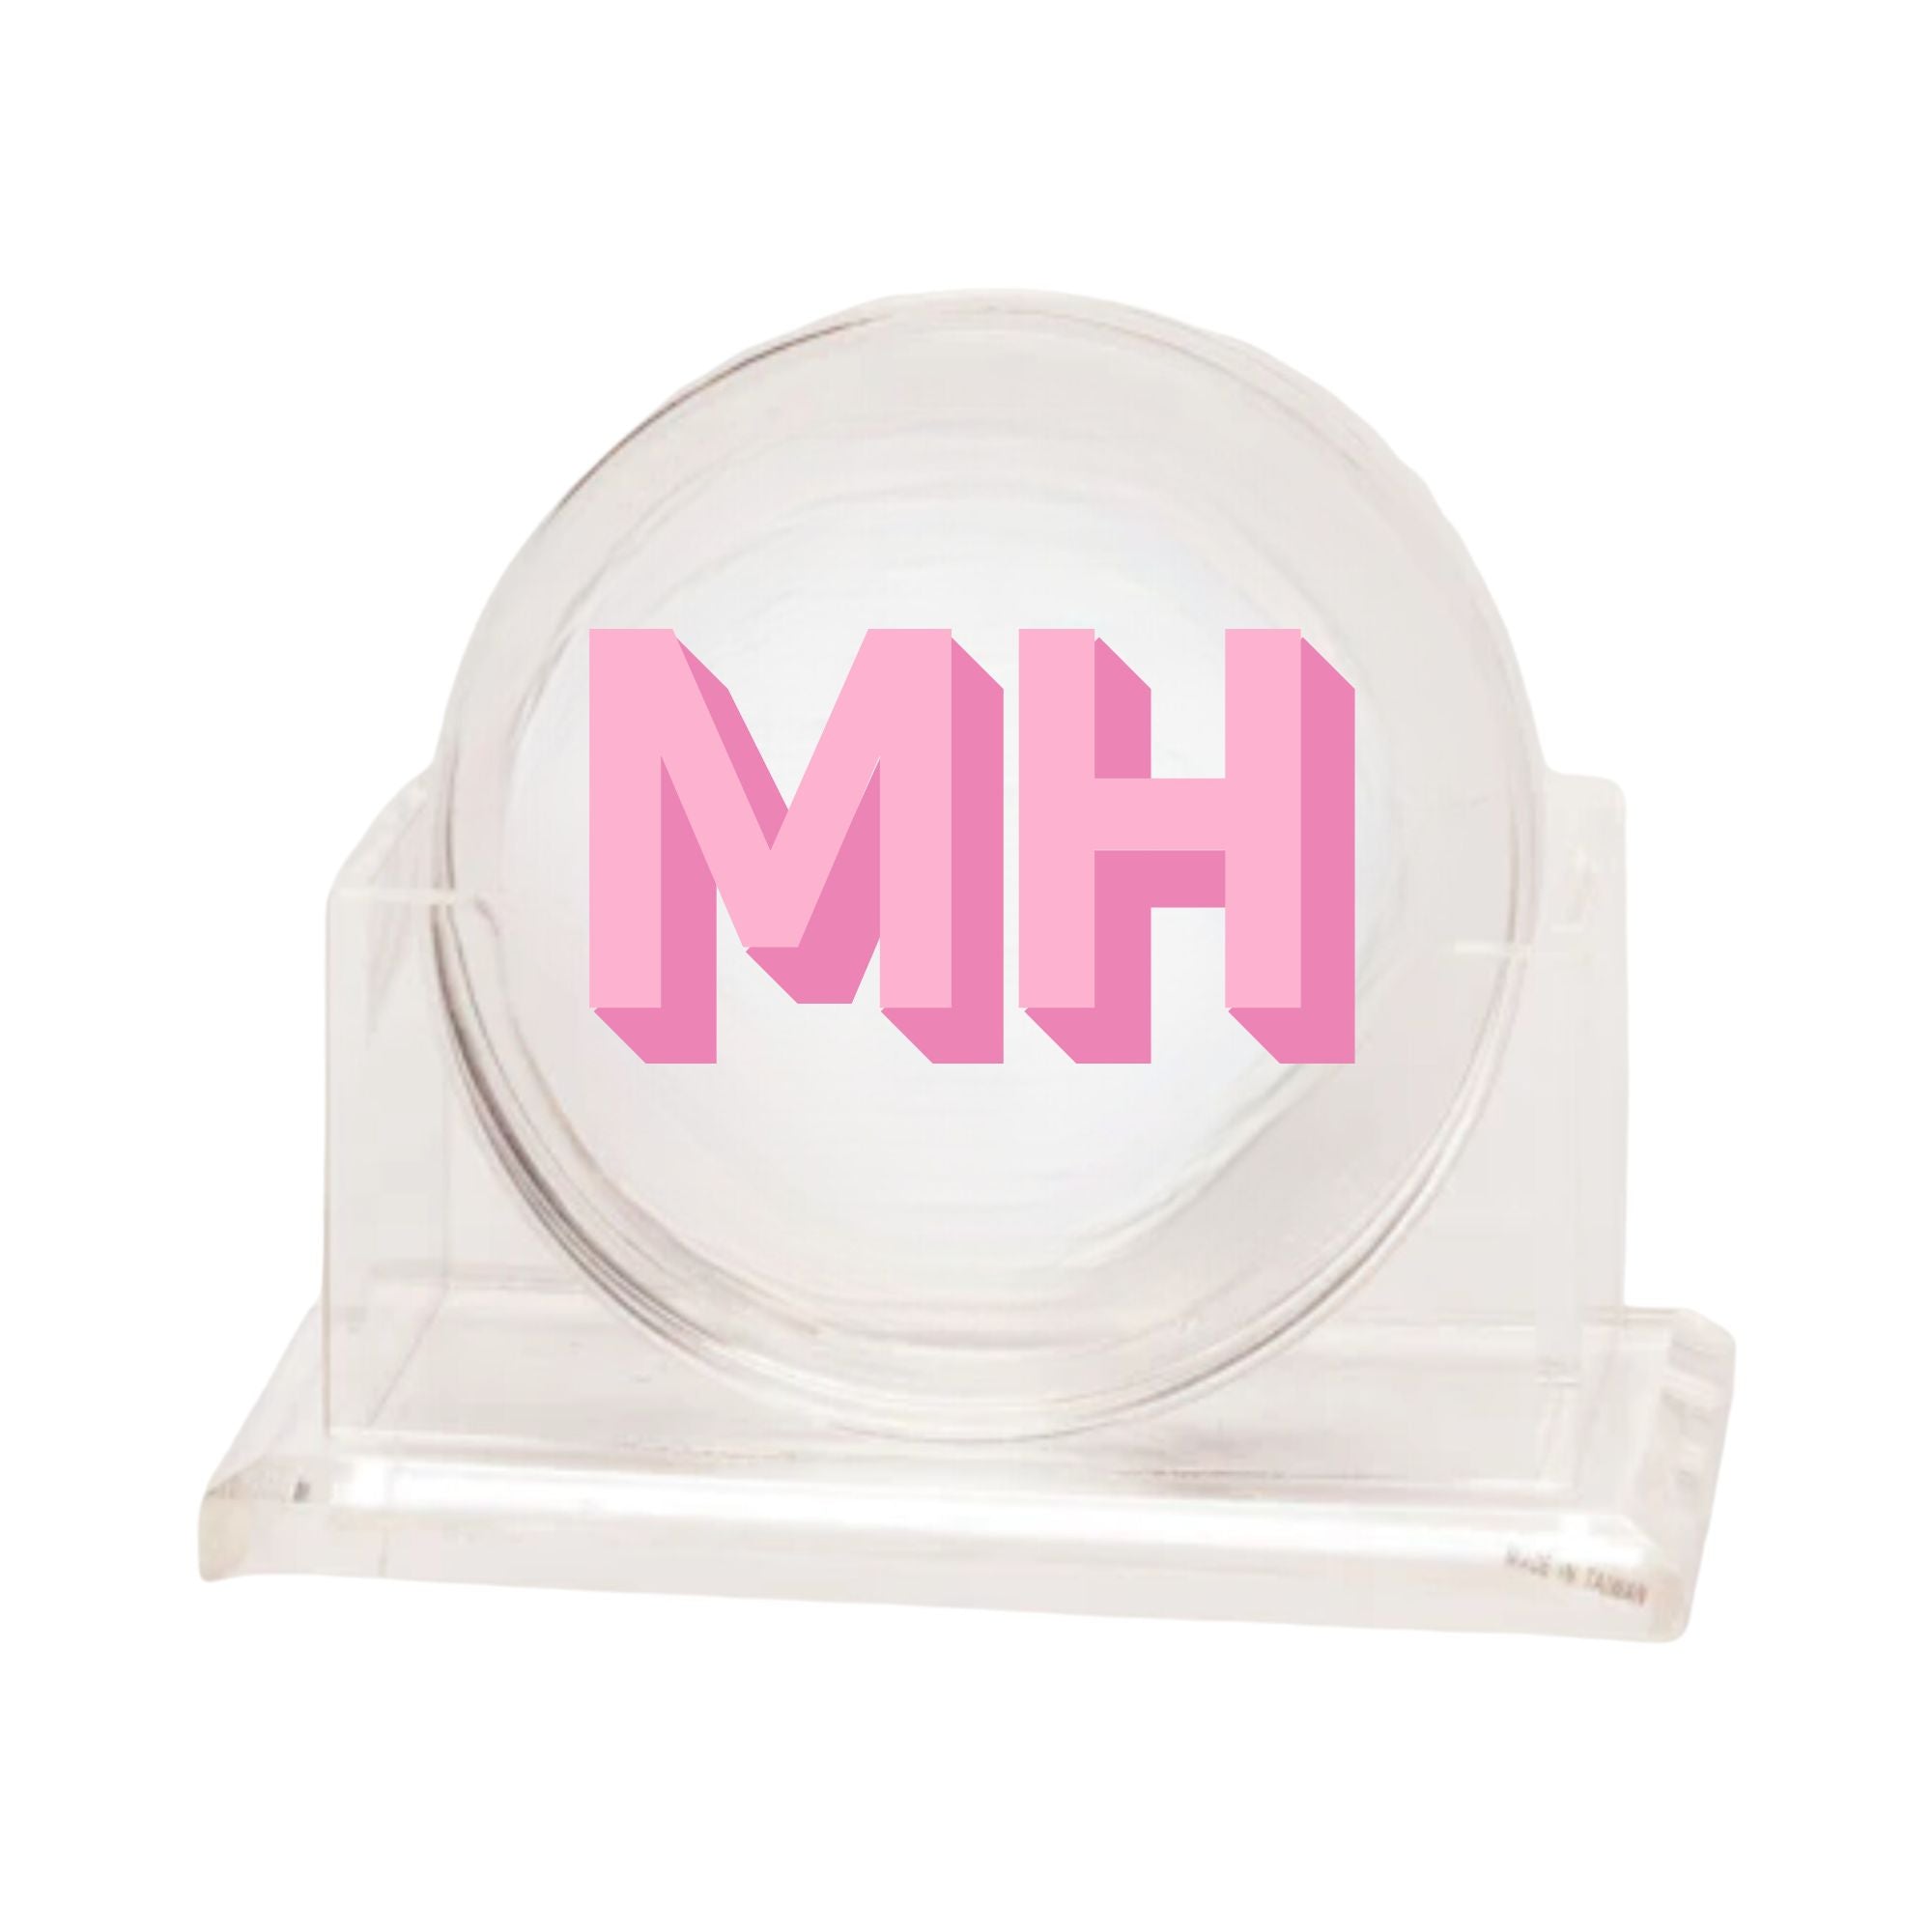 A set of coasters sits in a holder showing off it's custom pink monogram.